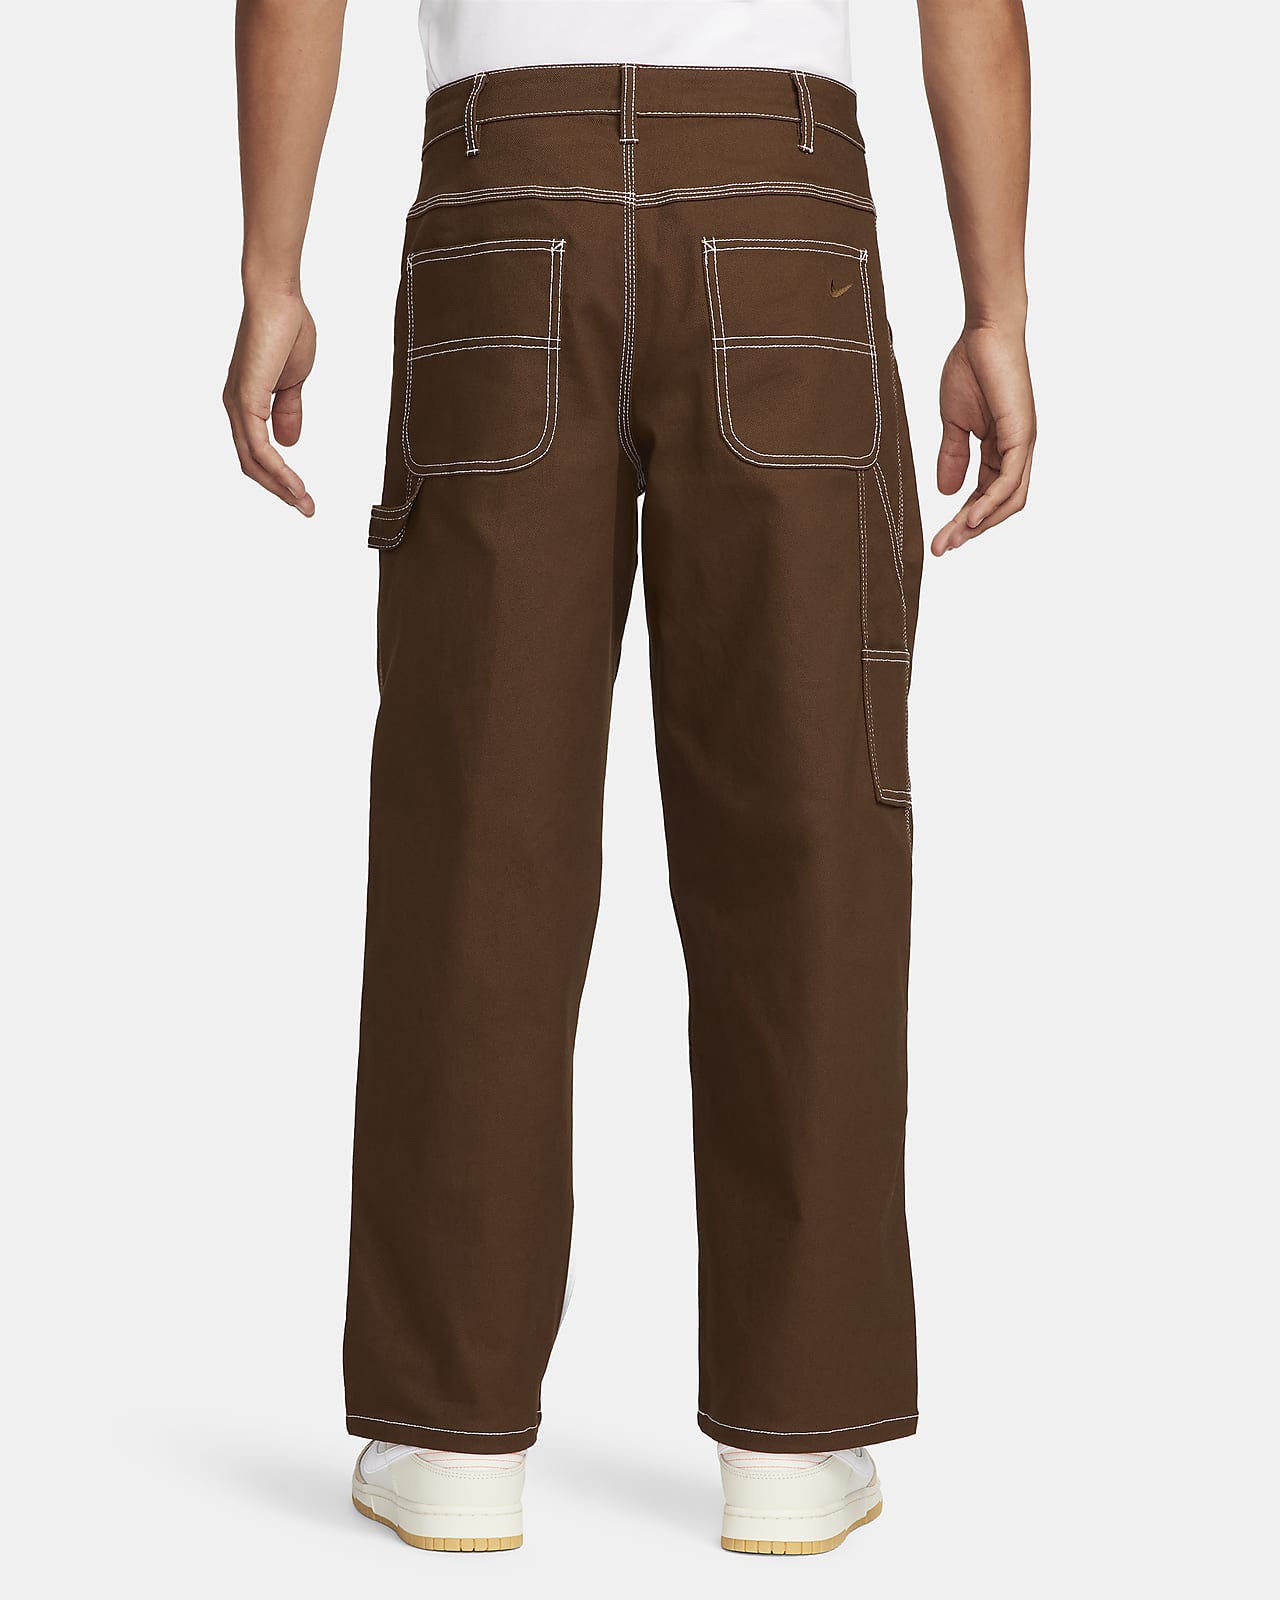 Dickies Mens Industry 300 Two Tone Work Trousers | Trousers